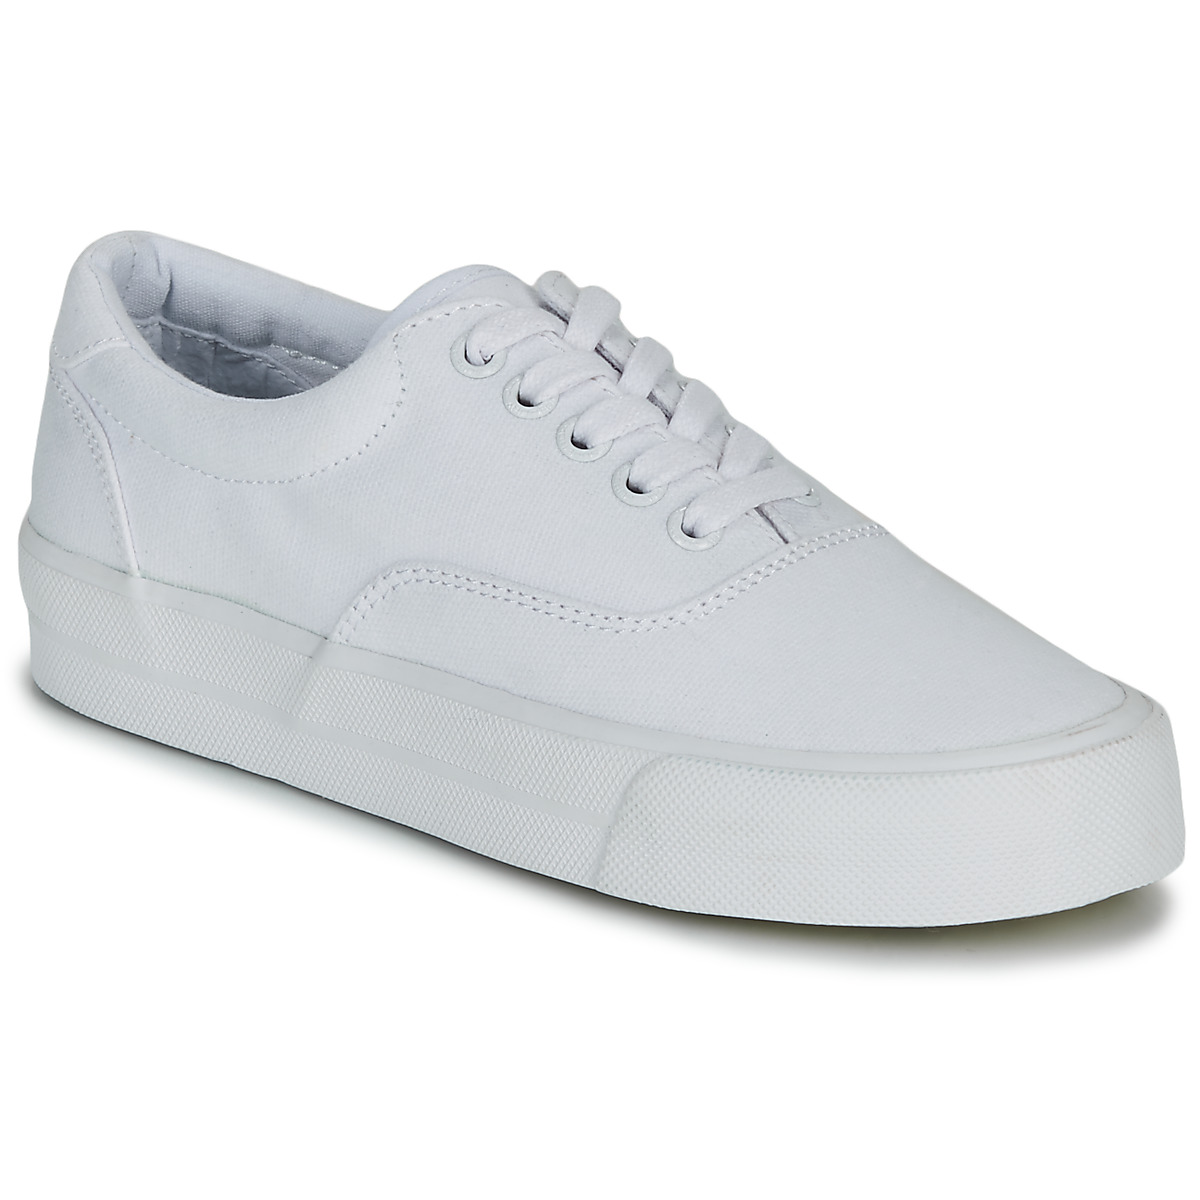 Superdry Classic Lace Up Trainer White